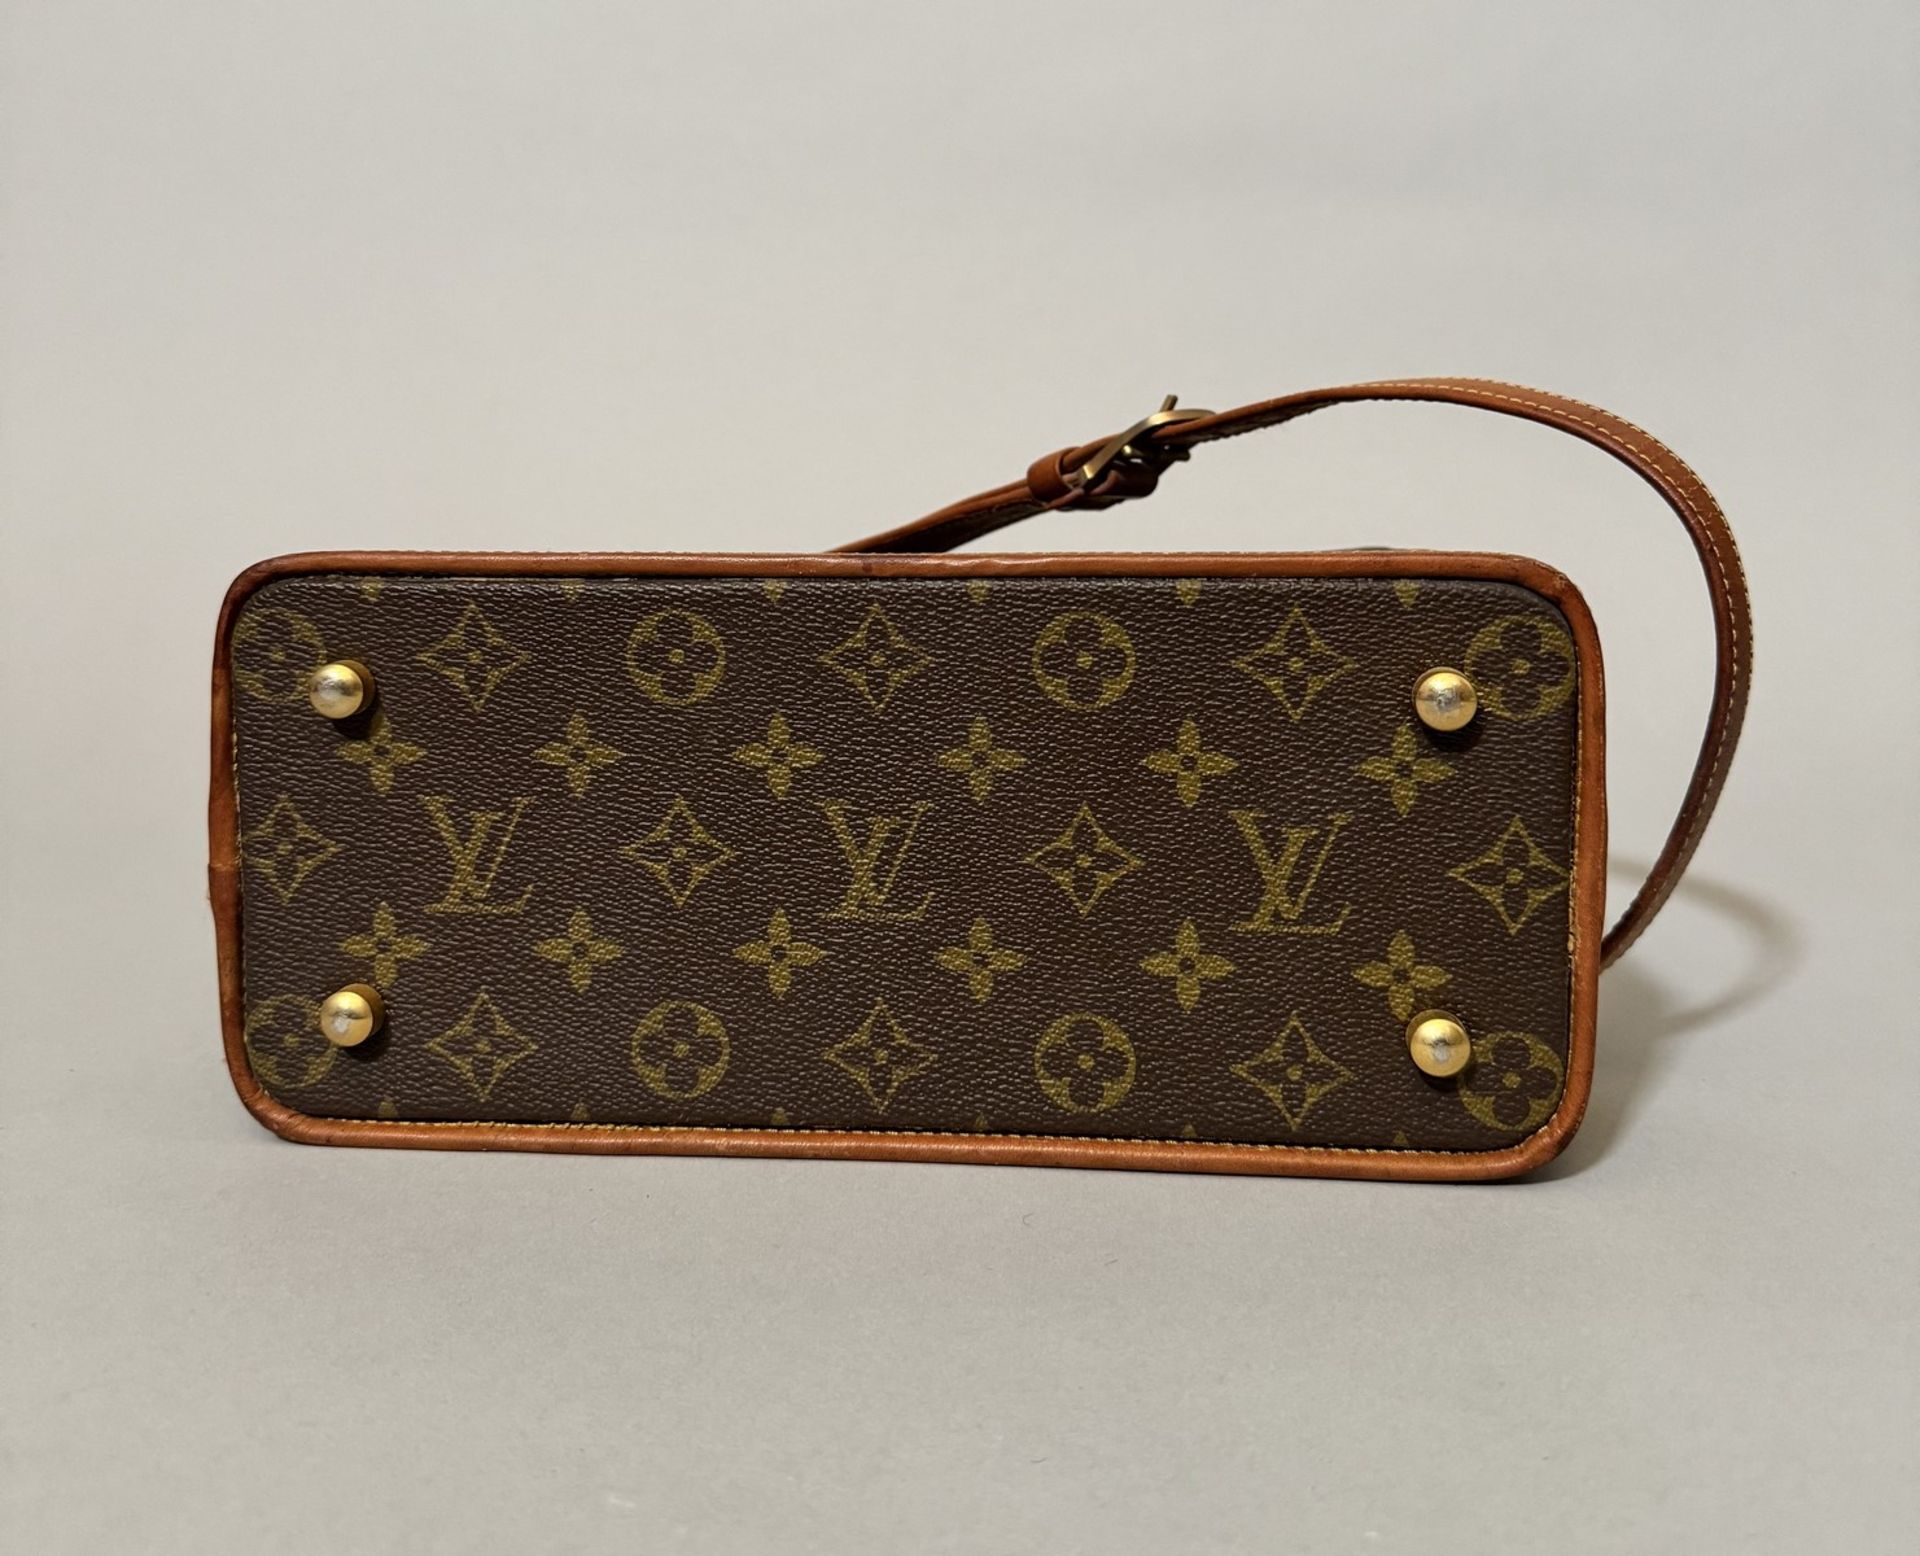 Henry-Louis VUITTON (1911-2002). - Image 4 of 5